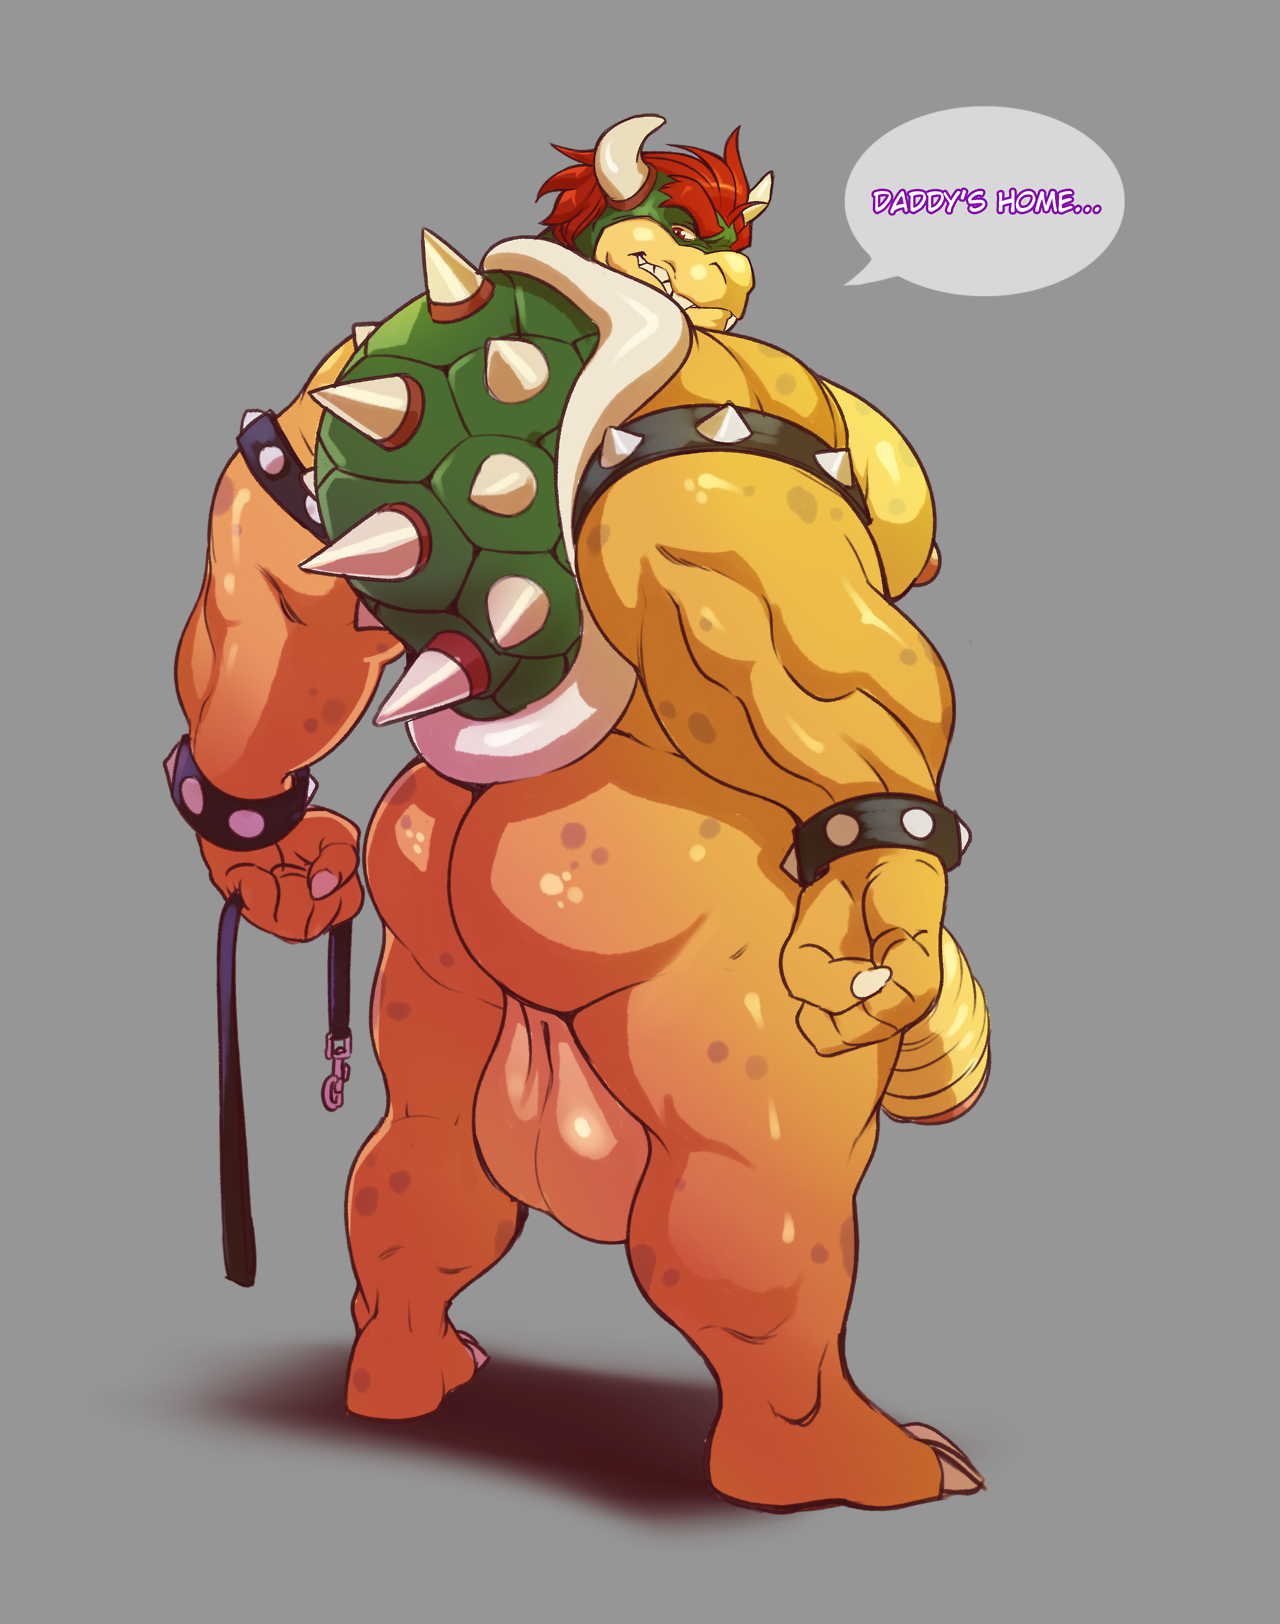 ghosts-go-boo: I’m not even sorry. A very lewd Bowser. I’m not officially furry